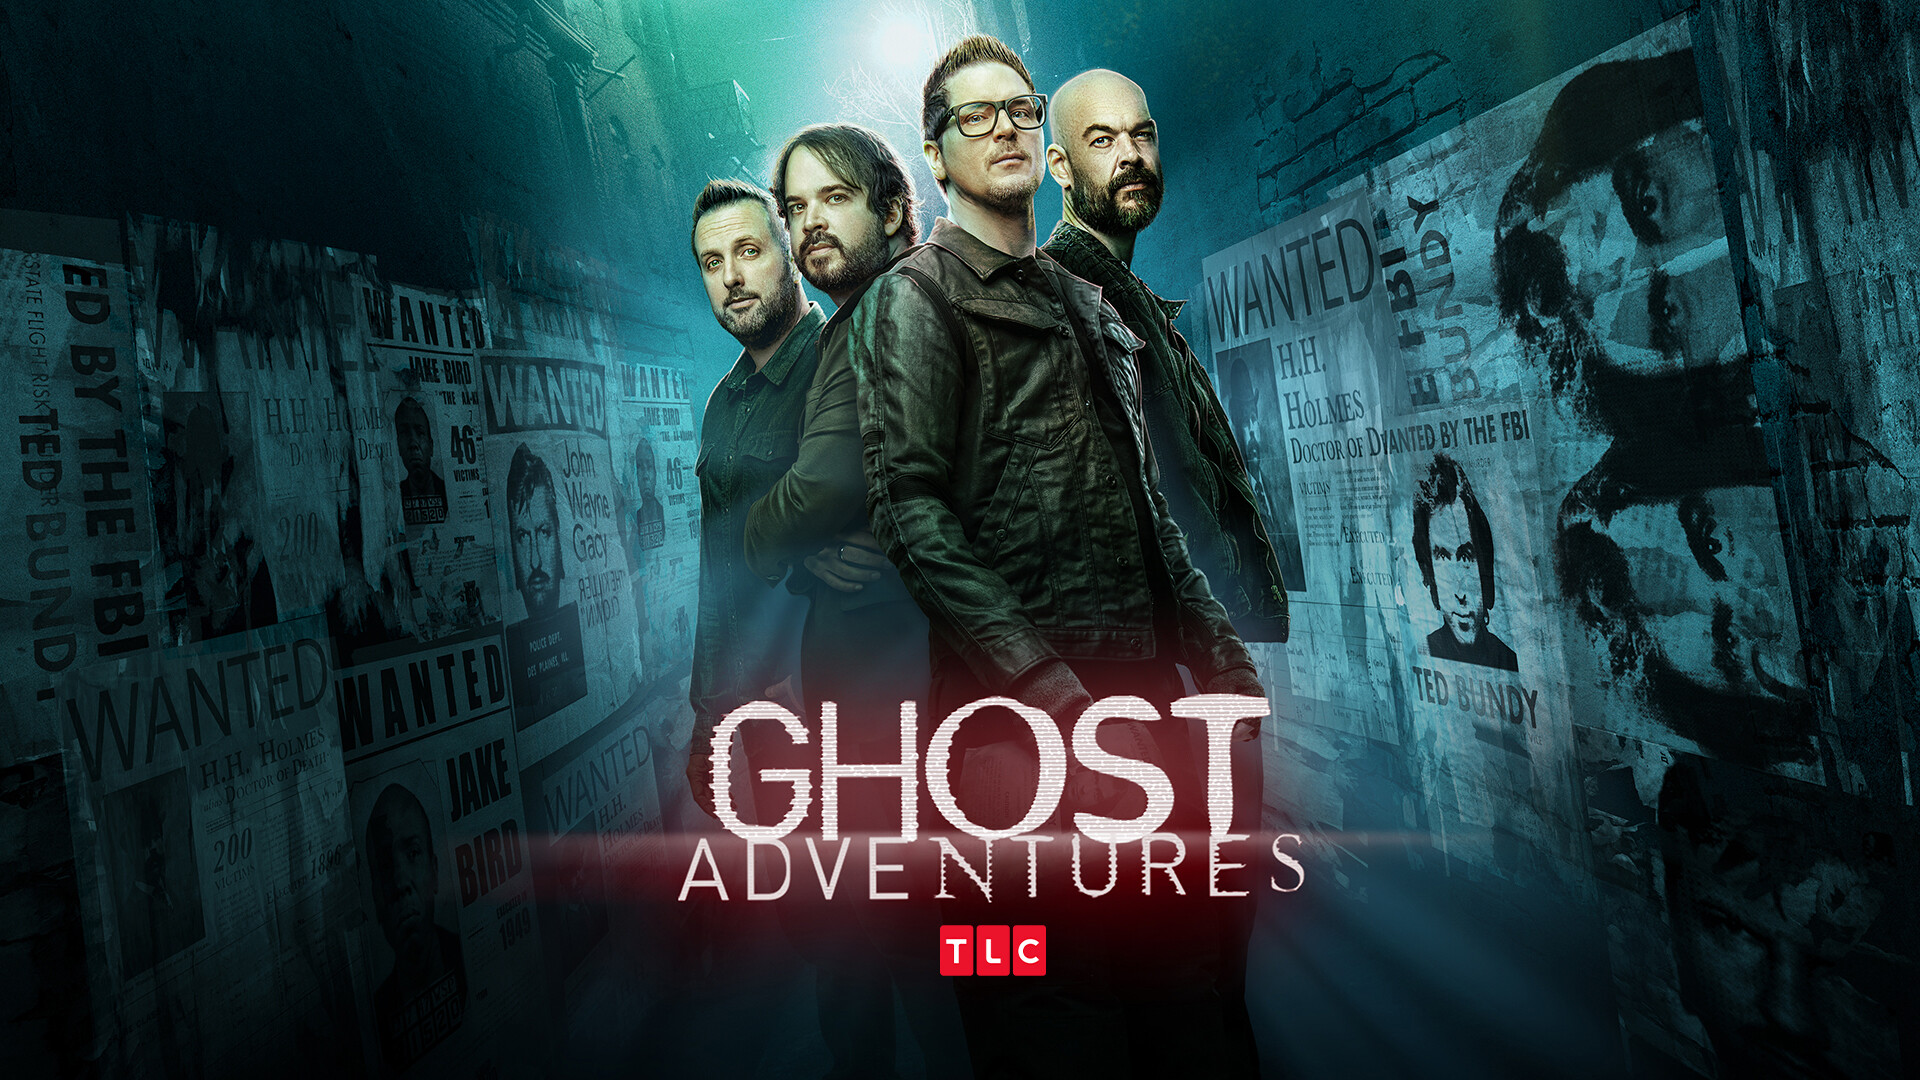 Ghost Adventures (TV Series): Travel Channel original, Investigation of Ted Bundy and John Wayne Gacy cases by a team of ghost hunters. 1920x1080 Full HD Background.